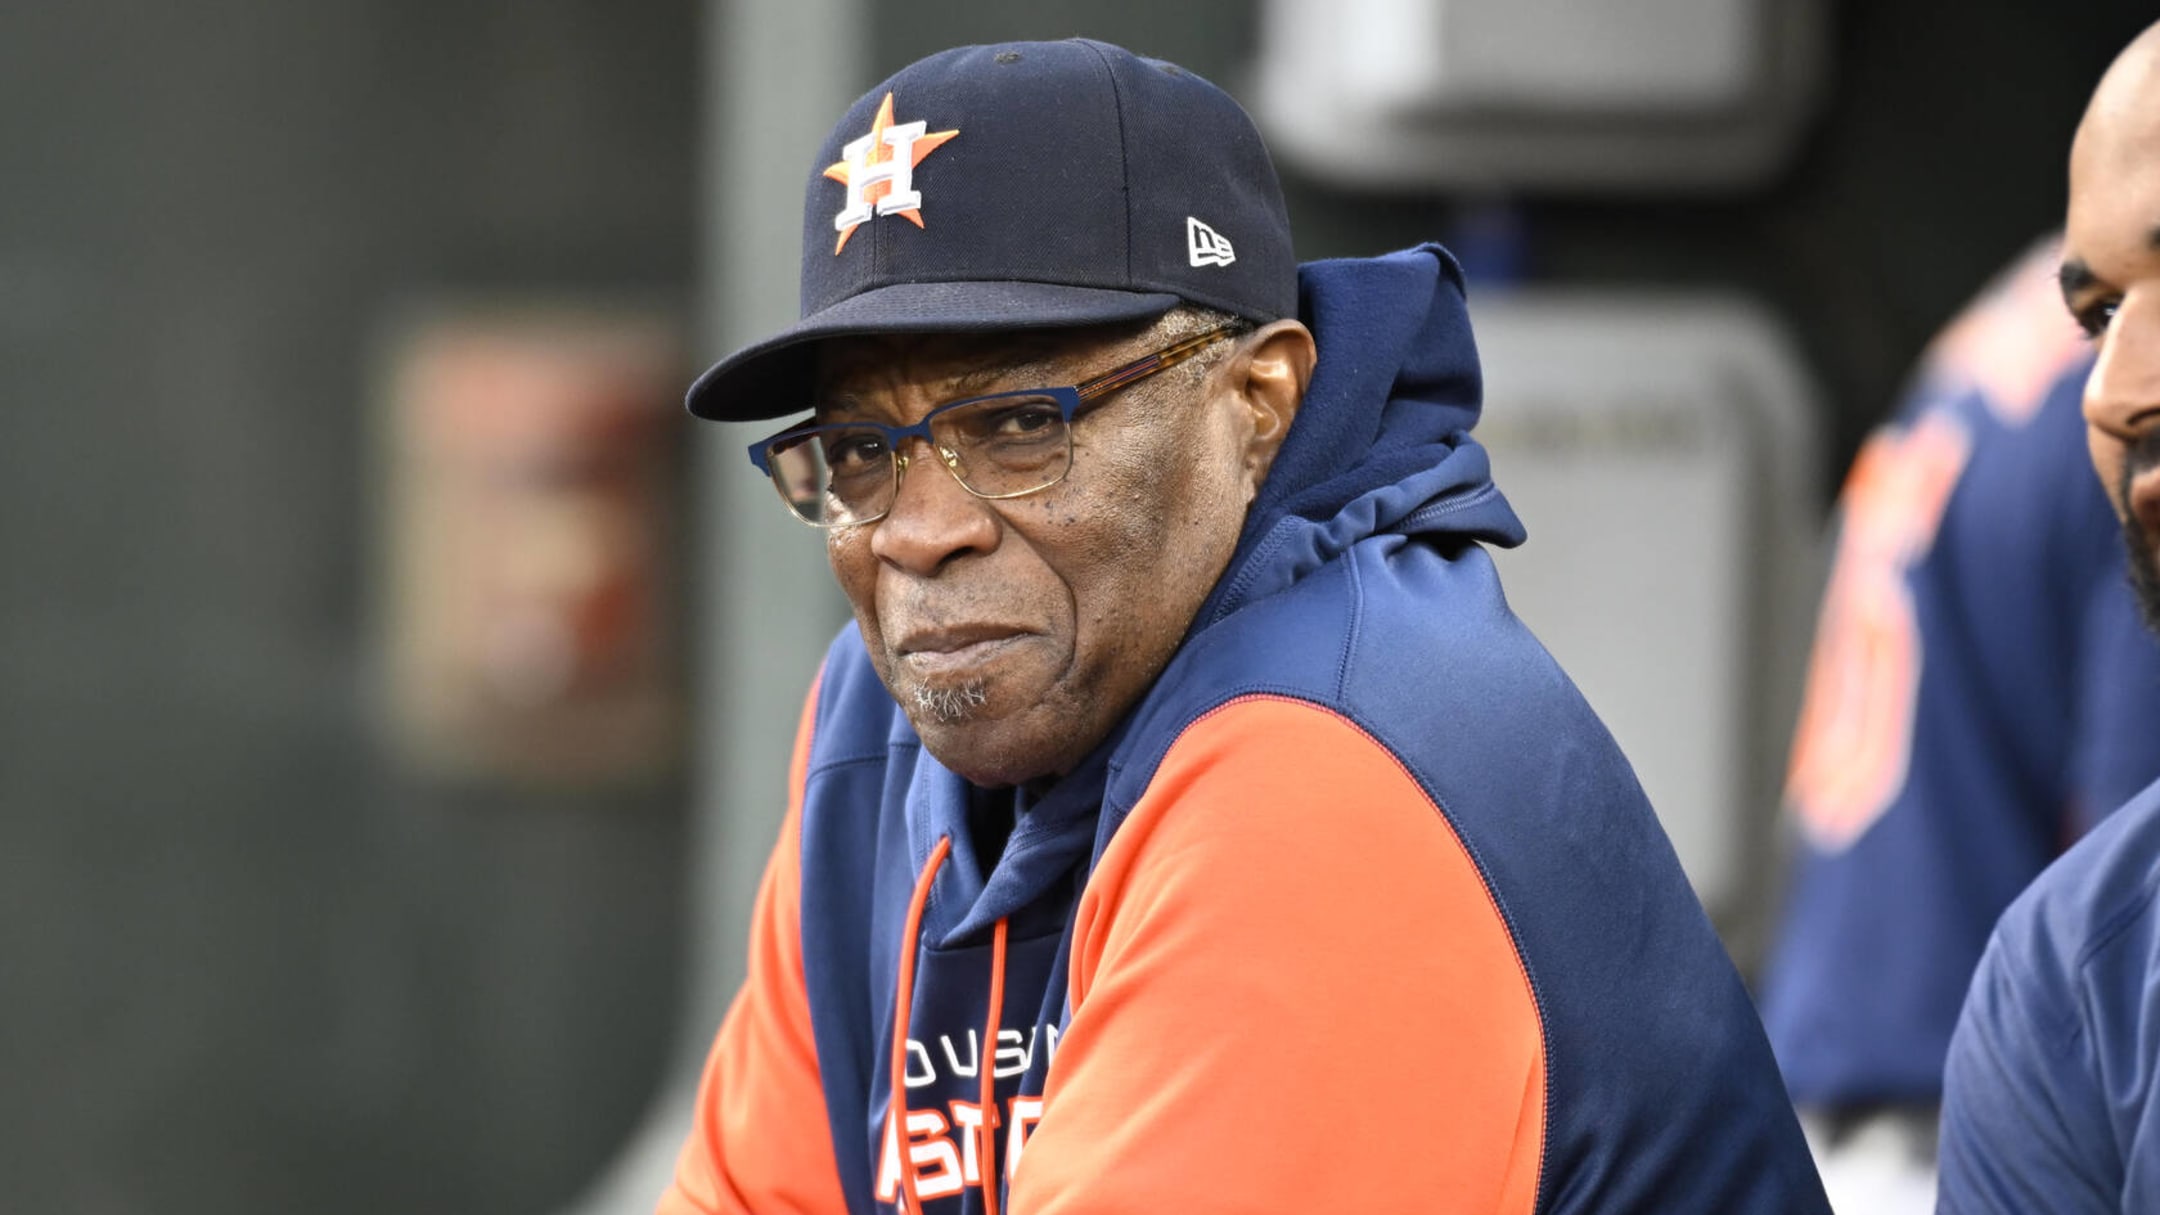 Dusty Baker Says Aaron Judge Was 'Wrong' For Tugging Jersey on